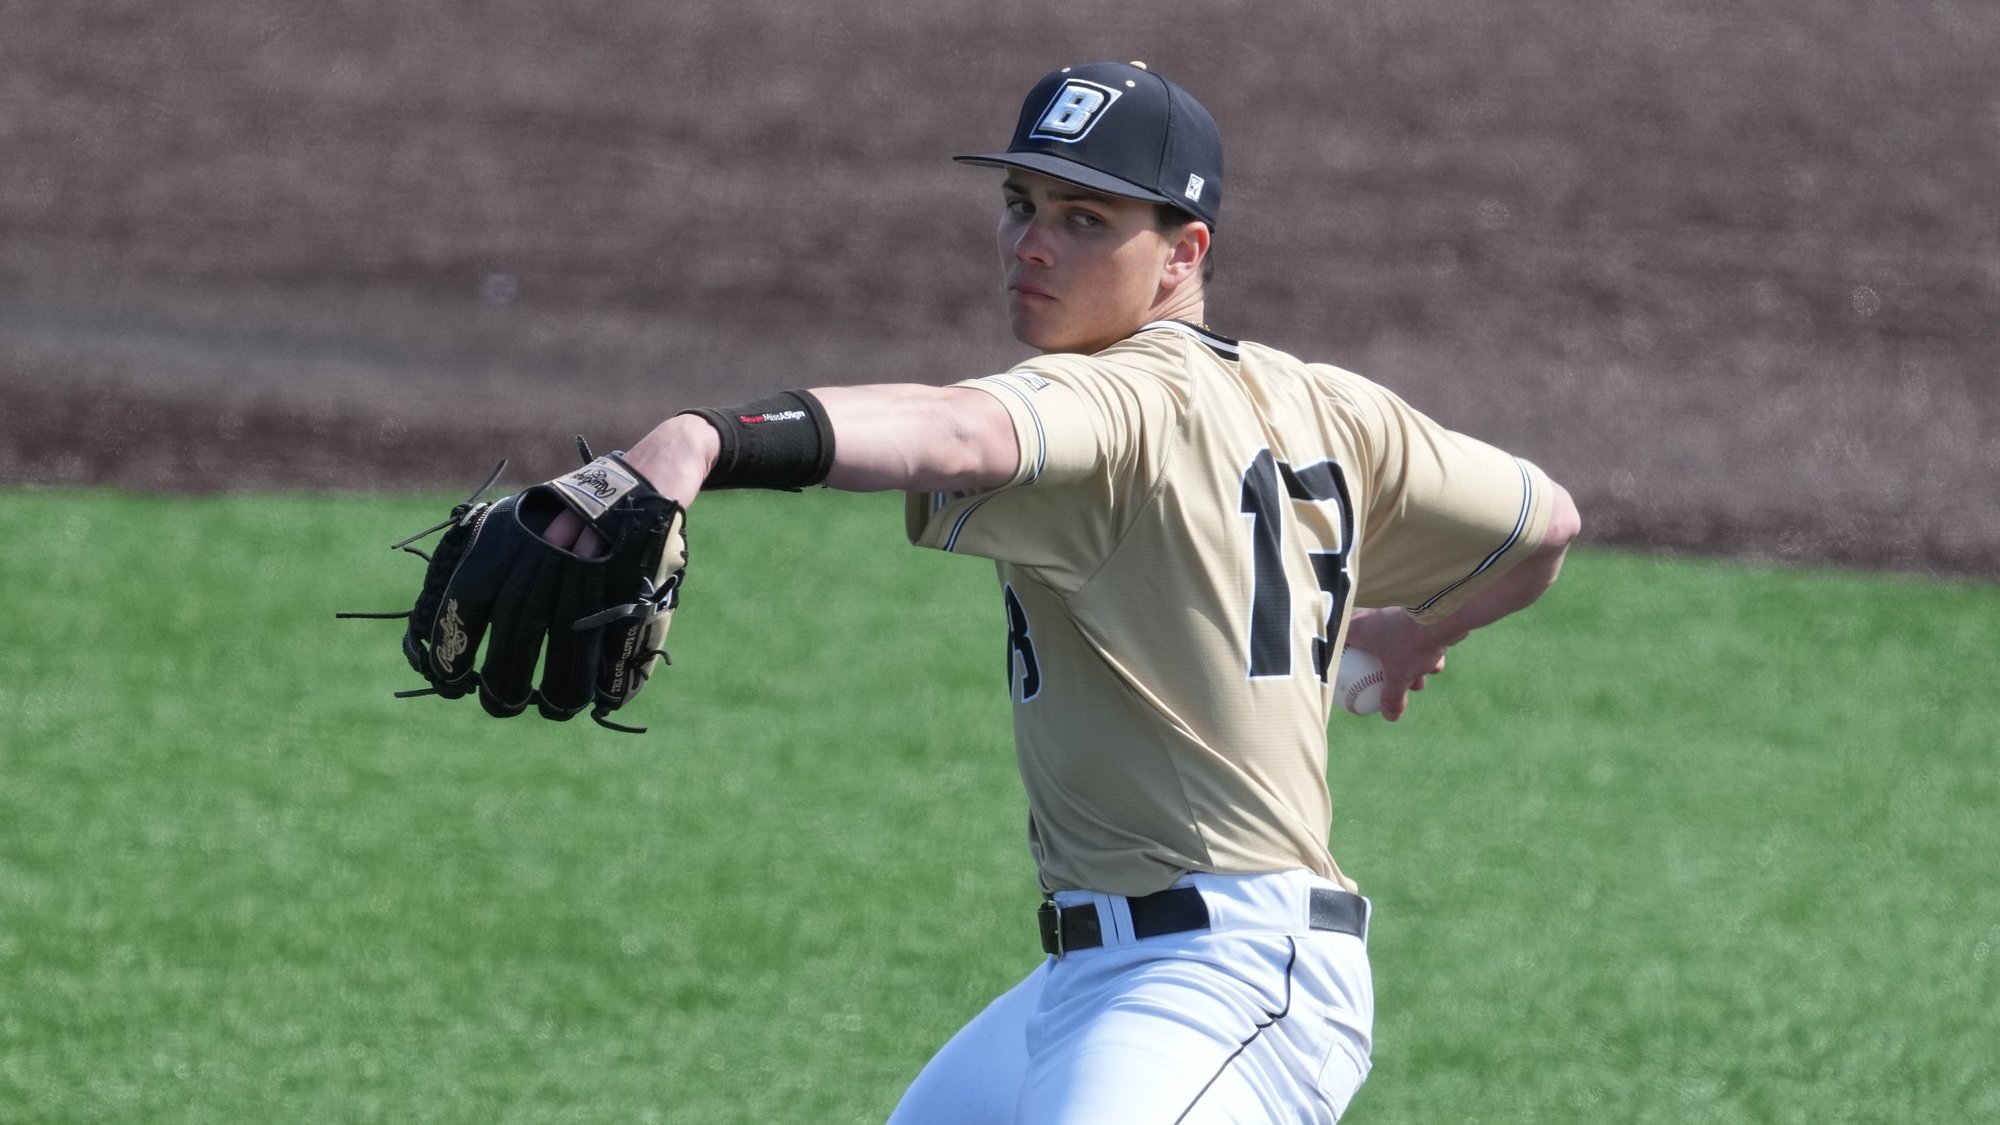 Wainer, Petosa lift Bryant to win in America East opener